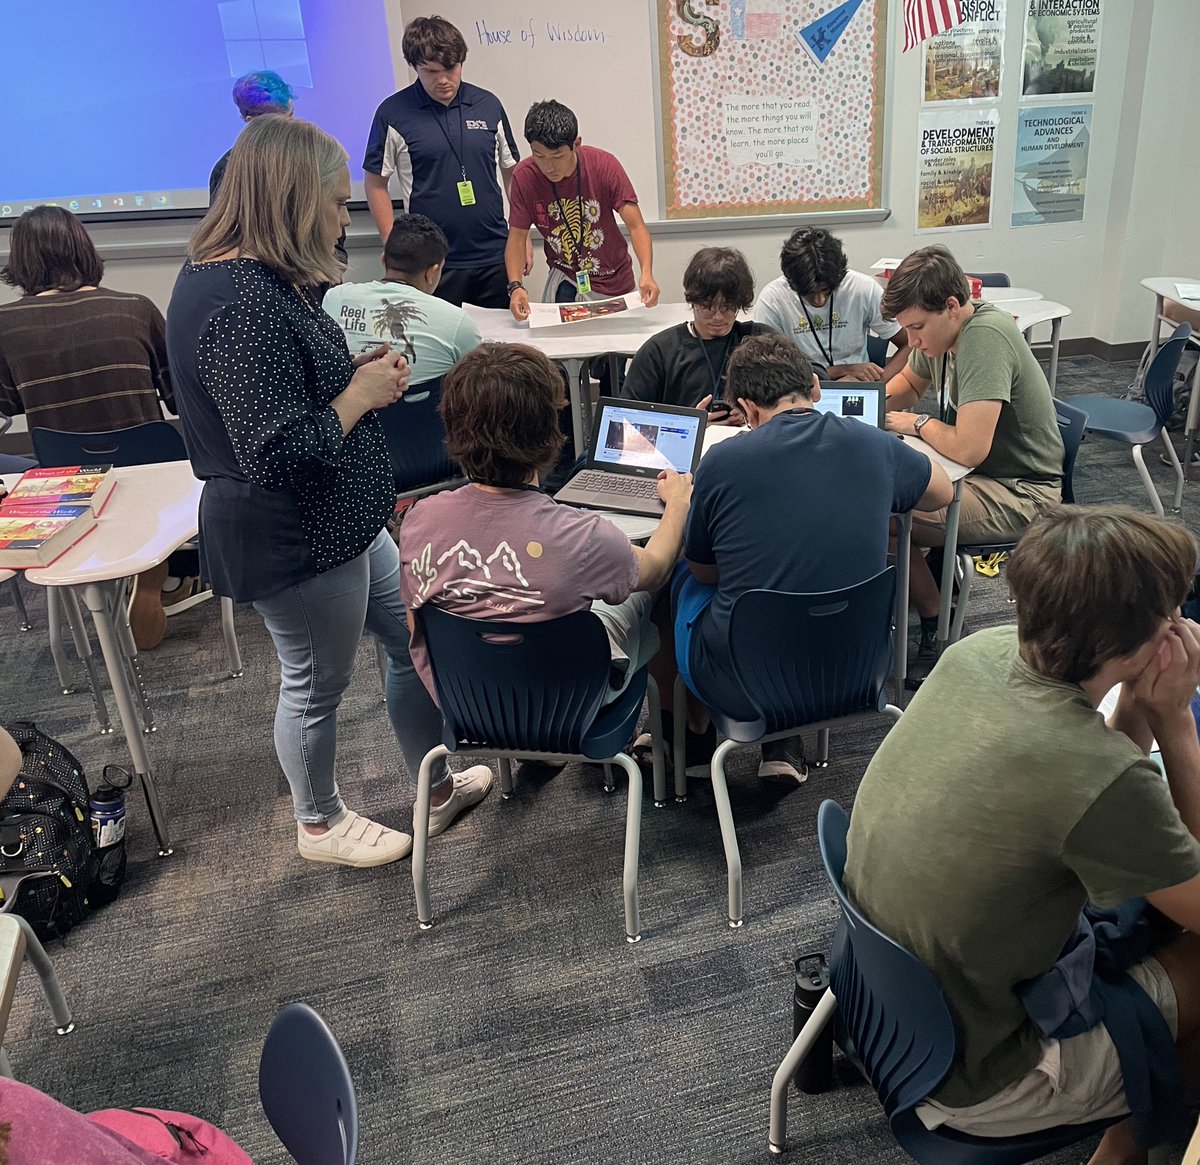 Mrs. Stanley’s AP Euro students become art historians by dissecting Renaissance art pieces to determine elements and their meaning. They must decide which elements personify Renaissance art and recreate and it live. 🖼️ #thinkinglikeahistorian
@humble_SocSt @HumbleISD_KHS